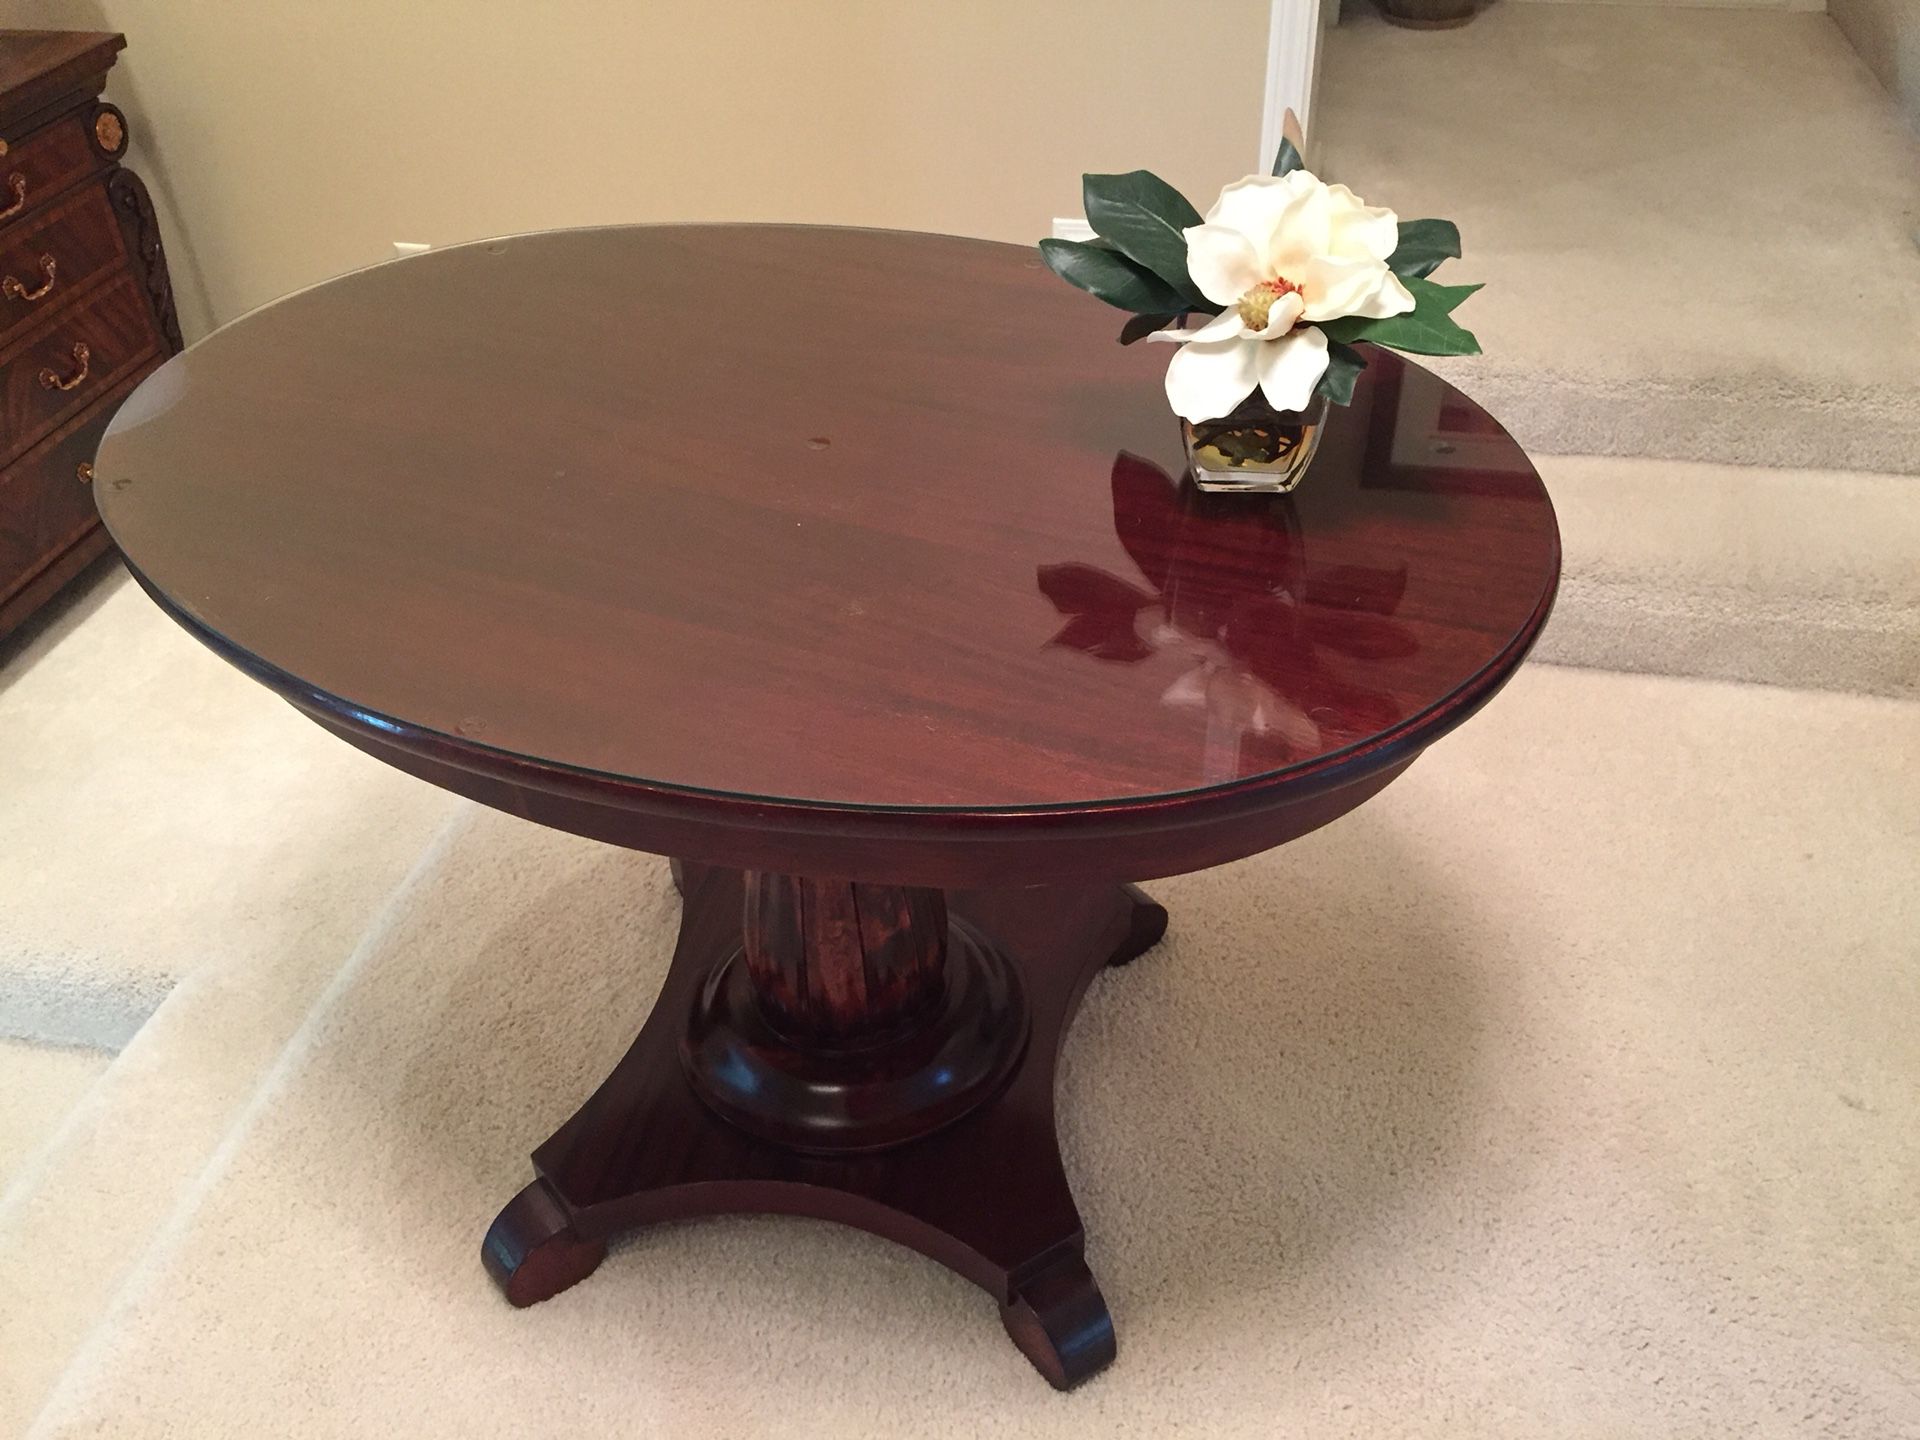 Classic Cherry Oval Table. $175